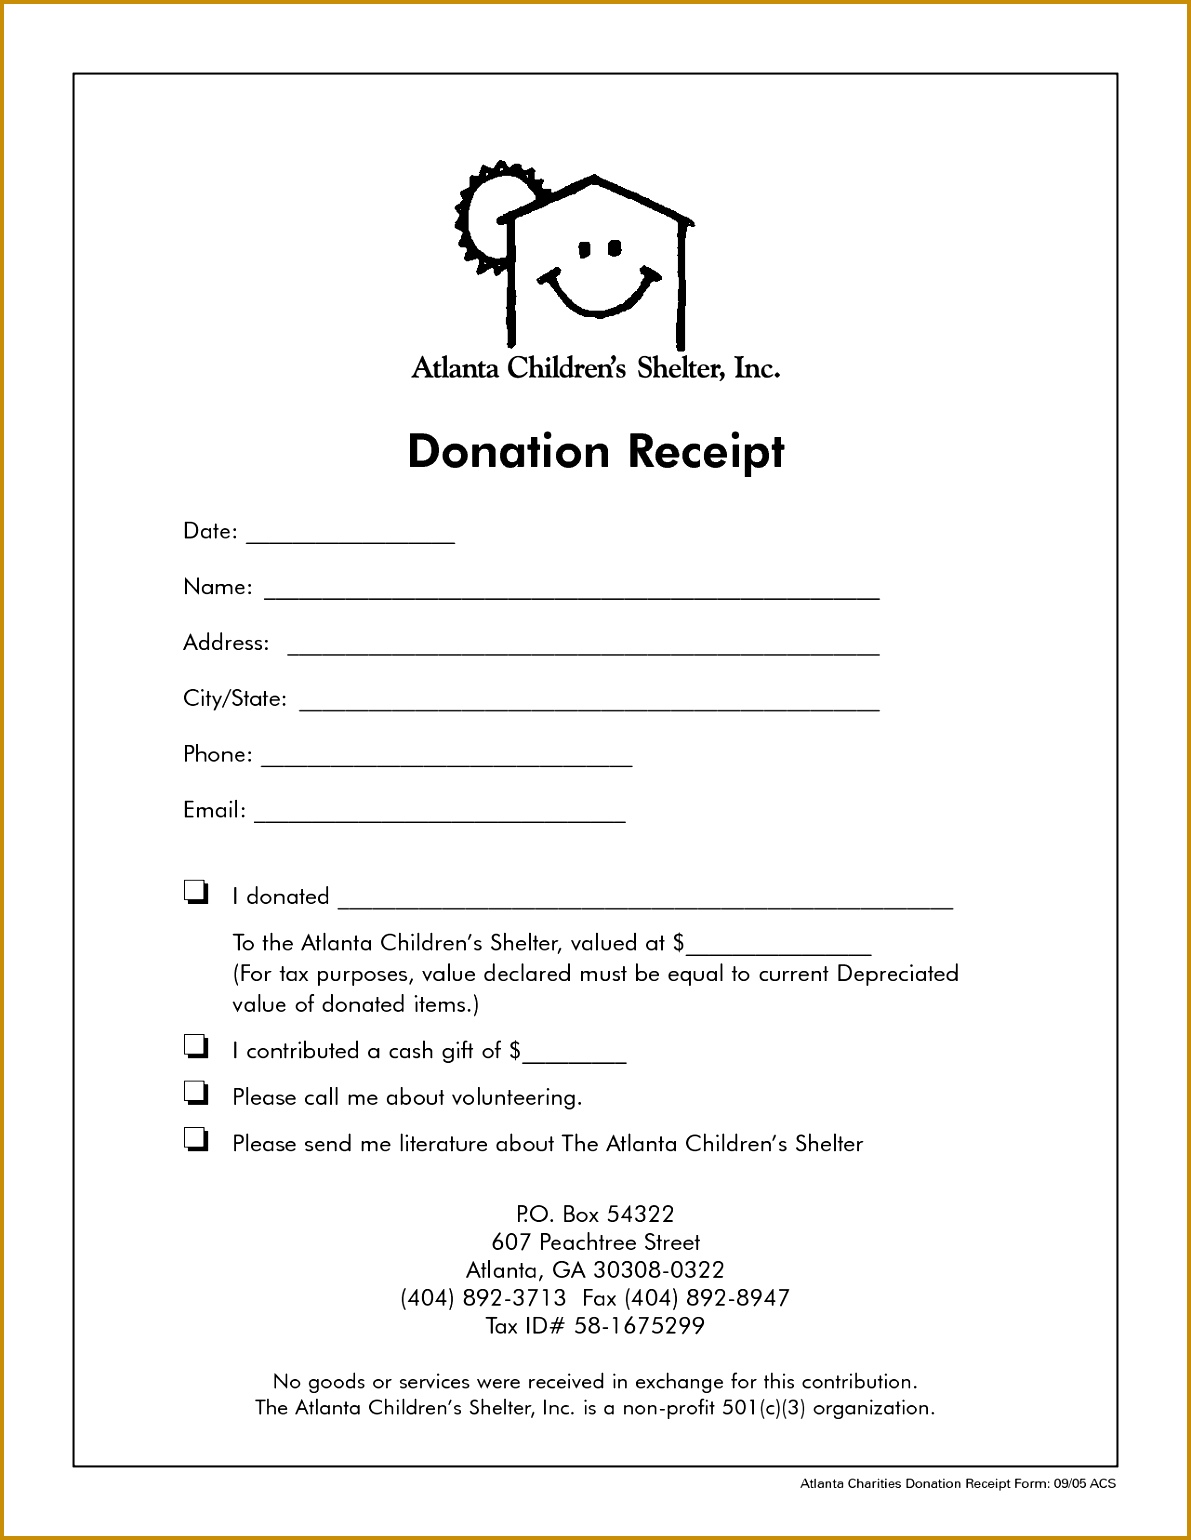 fantastic-free-church-donation-receipt-template-awesome-receipt-templates